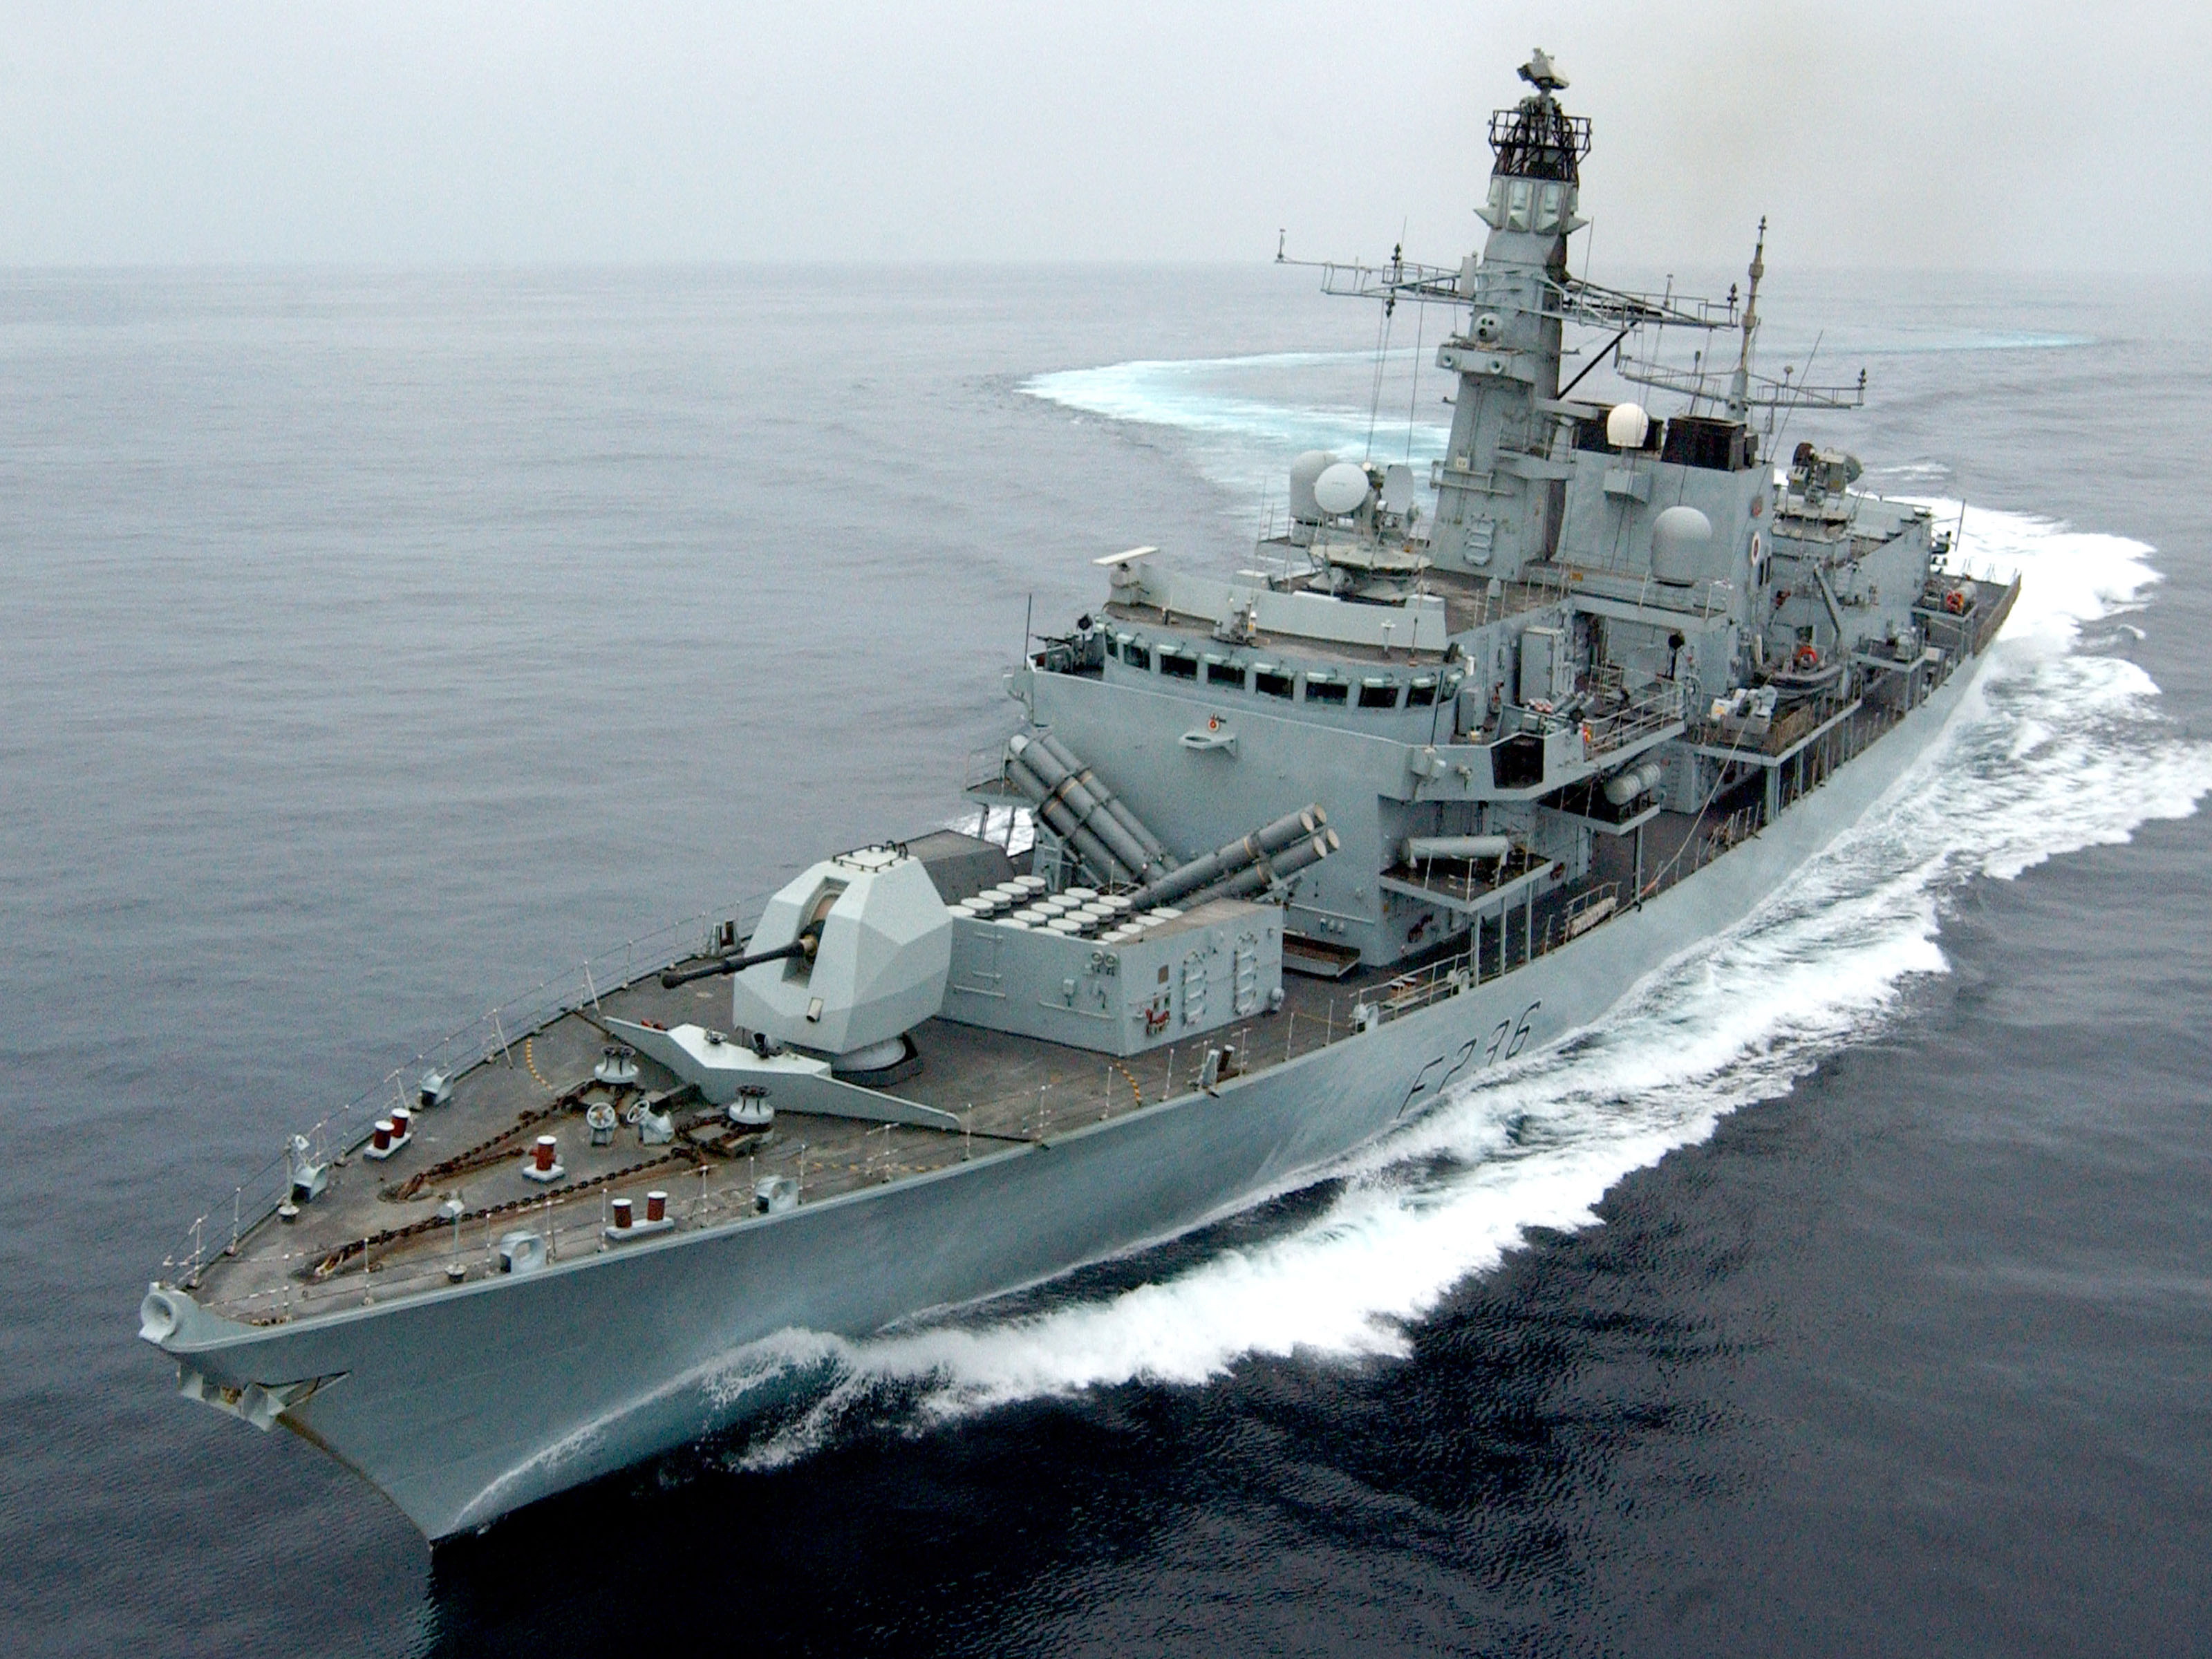 epa07709092 (FILE) - A handout photo made available by the British Ministry of Defence shows HMS Montrose, a Type 23 frigate, performing a series of tight turns in the Arabian Sea, 22 March 2005 (issued 11 July 2019). According to media reports, Iranian boats tried to intercept British Heritage, a British oil tanker, before being driven off by HMS Montrose.  EPA/MICK STOREY / HANDOUT MANDATORY CREDIT: MOD CROWN COPYRIGHT HANDOUT EDITORIAL USE ONLY/NO SALES